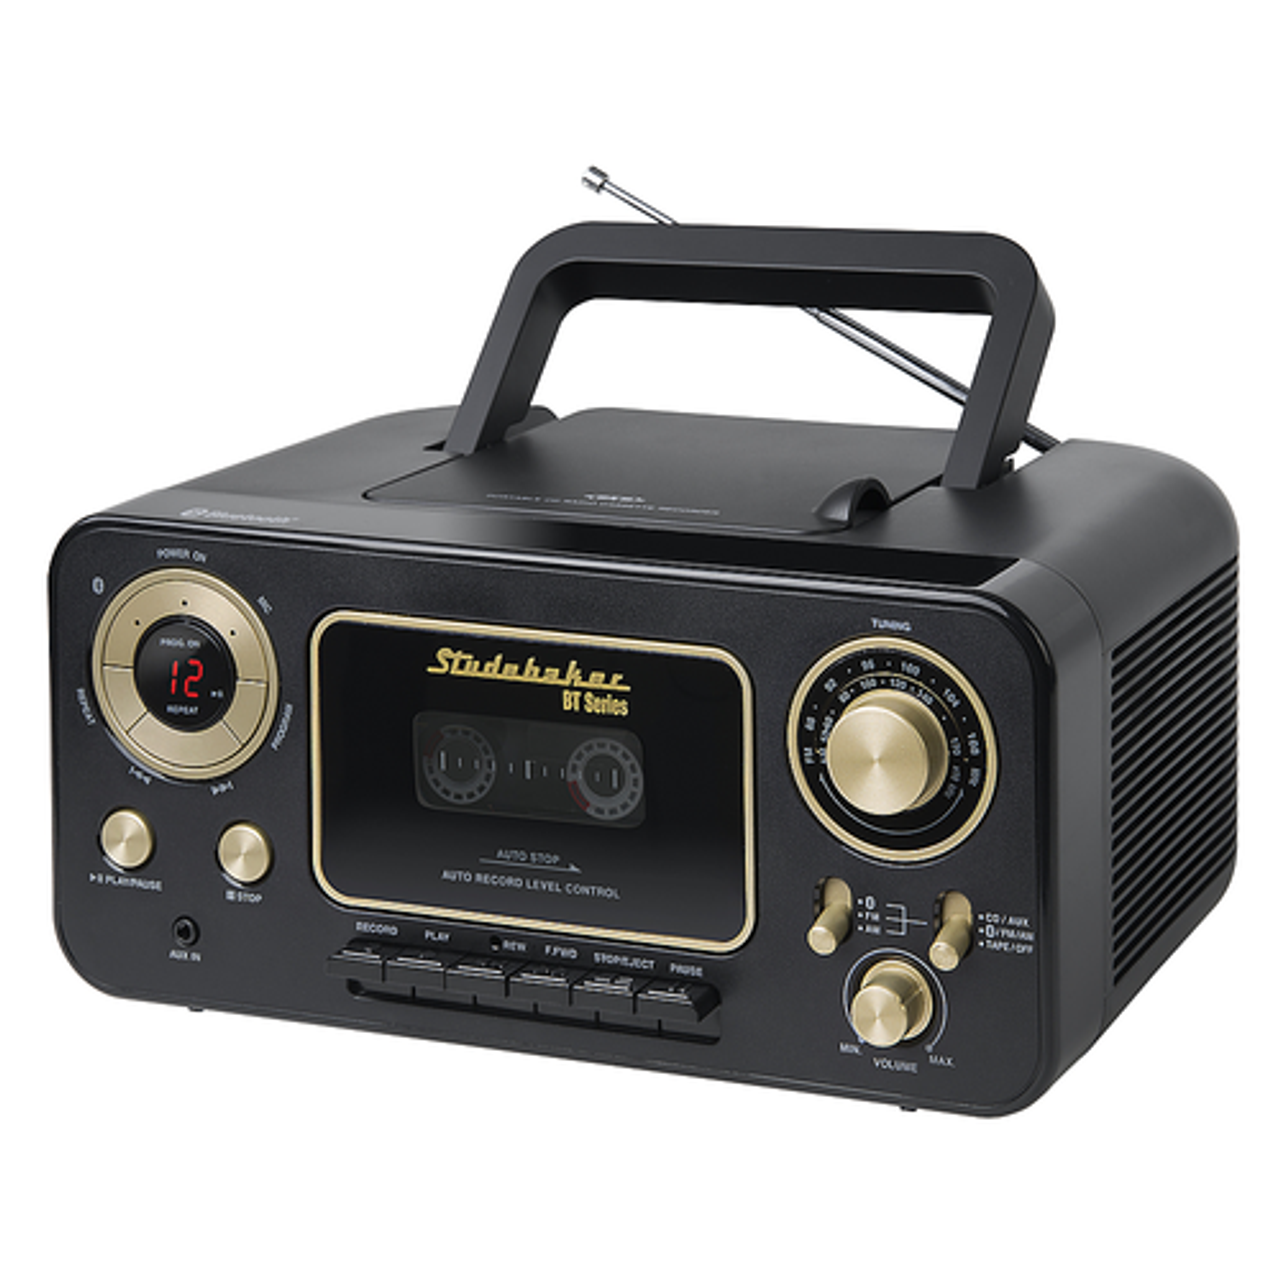 Studebaker - Portable Stereo CD Player with Bluetooth, AM/FM Stereo Radio and Cassette Player/Recorder - Black